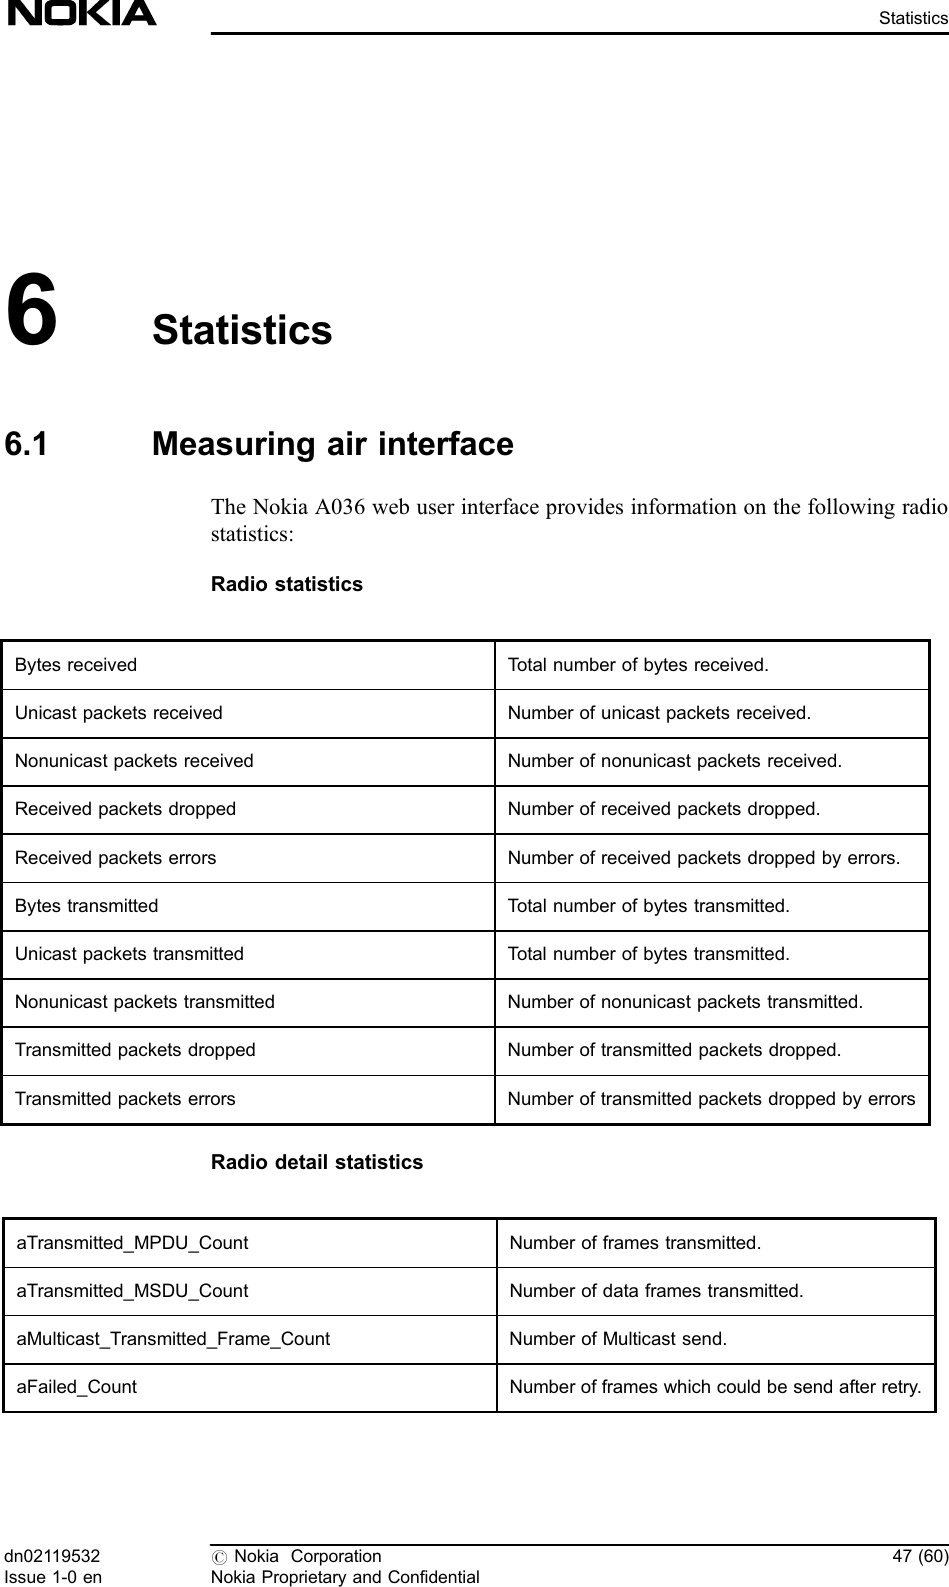 6Statistics6.1 Measuring air interfaceThe Nokia A036 web user interface provides information on the following radiostatistics:Radio statisticsBytes received Total number of bytes received.Unicast packets received Number of unicast packets received.Nonunicast packets received Number of nonunicast packets received.Received packets dropped Number of received packets dropped.Received packets errors Number of received packets dropped by errors.Bytes transmitted Total number of bytes transmitted.Unicast packets transmitted Total number of bytes transmitted.Nonunicast packets transmitted Number of nonunicast packets transmitted.Transmitted packets dropped Number of transmitted packets dropped.Transmitted packets errors Number of transmitted packets dropped by errorsRadio detail statisticsaTransmitted_MPDU_Count Number of frames transmitted.aTransmitted_MSDU_Count Number of data frames transmitted.aMulticast_Transmitted_Frame_Count Number of Multicast send.aFailed_Count Number of frames which could be send after retry.dn02119532Issue 1-0 en#Nokia CorporationNokia Proprietary and Confidential47 (60)Statistics